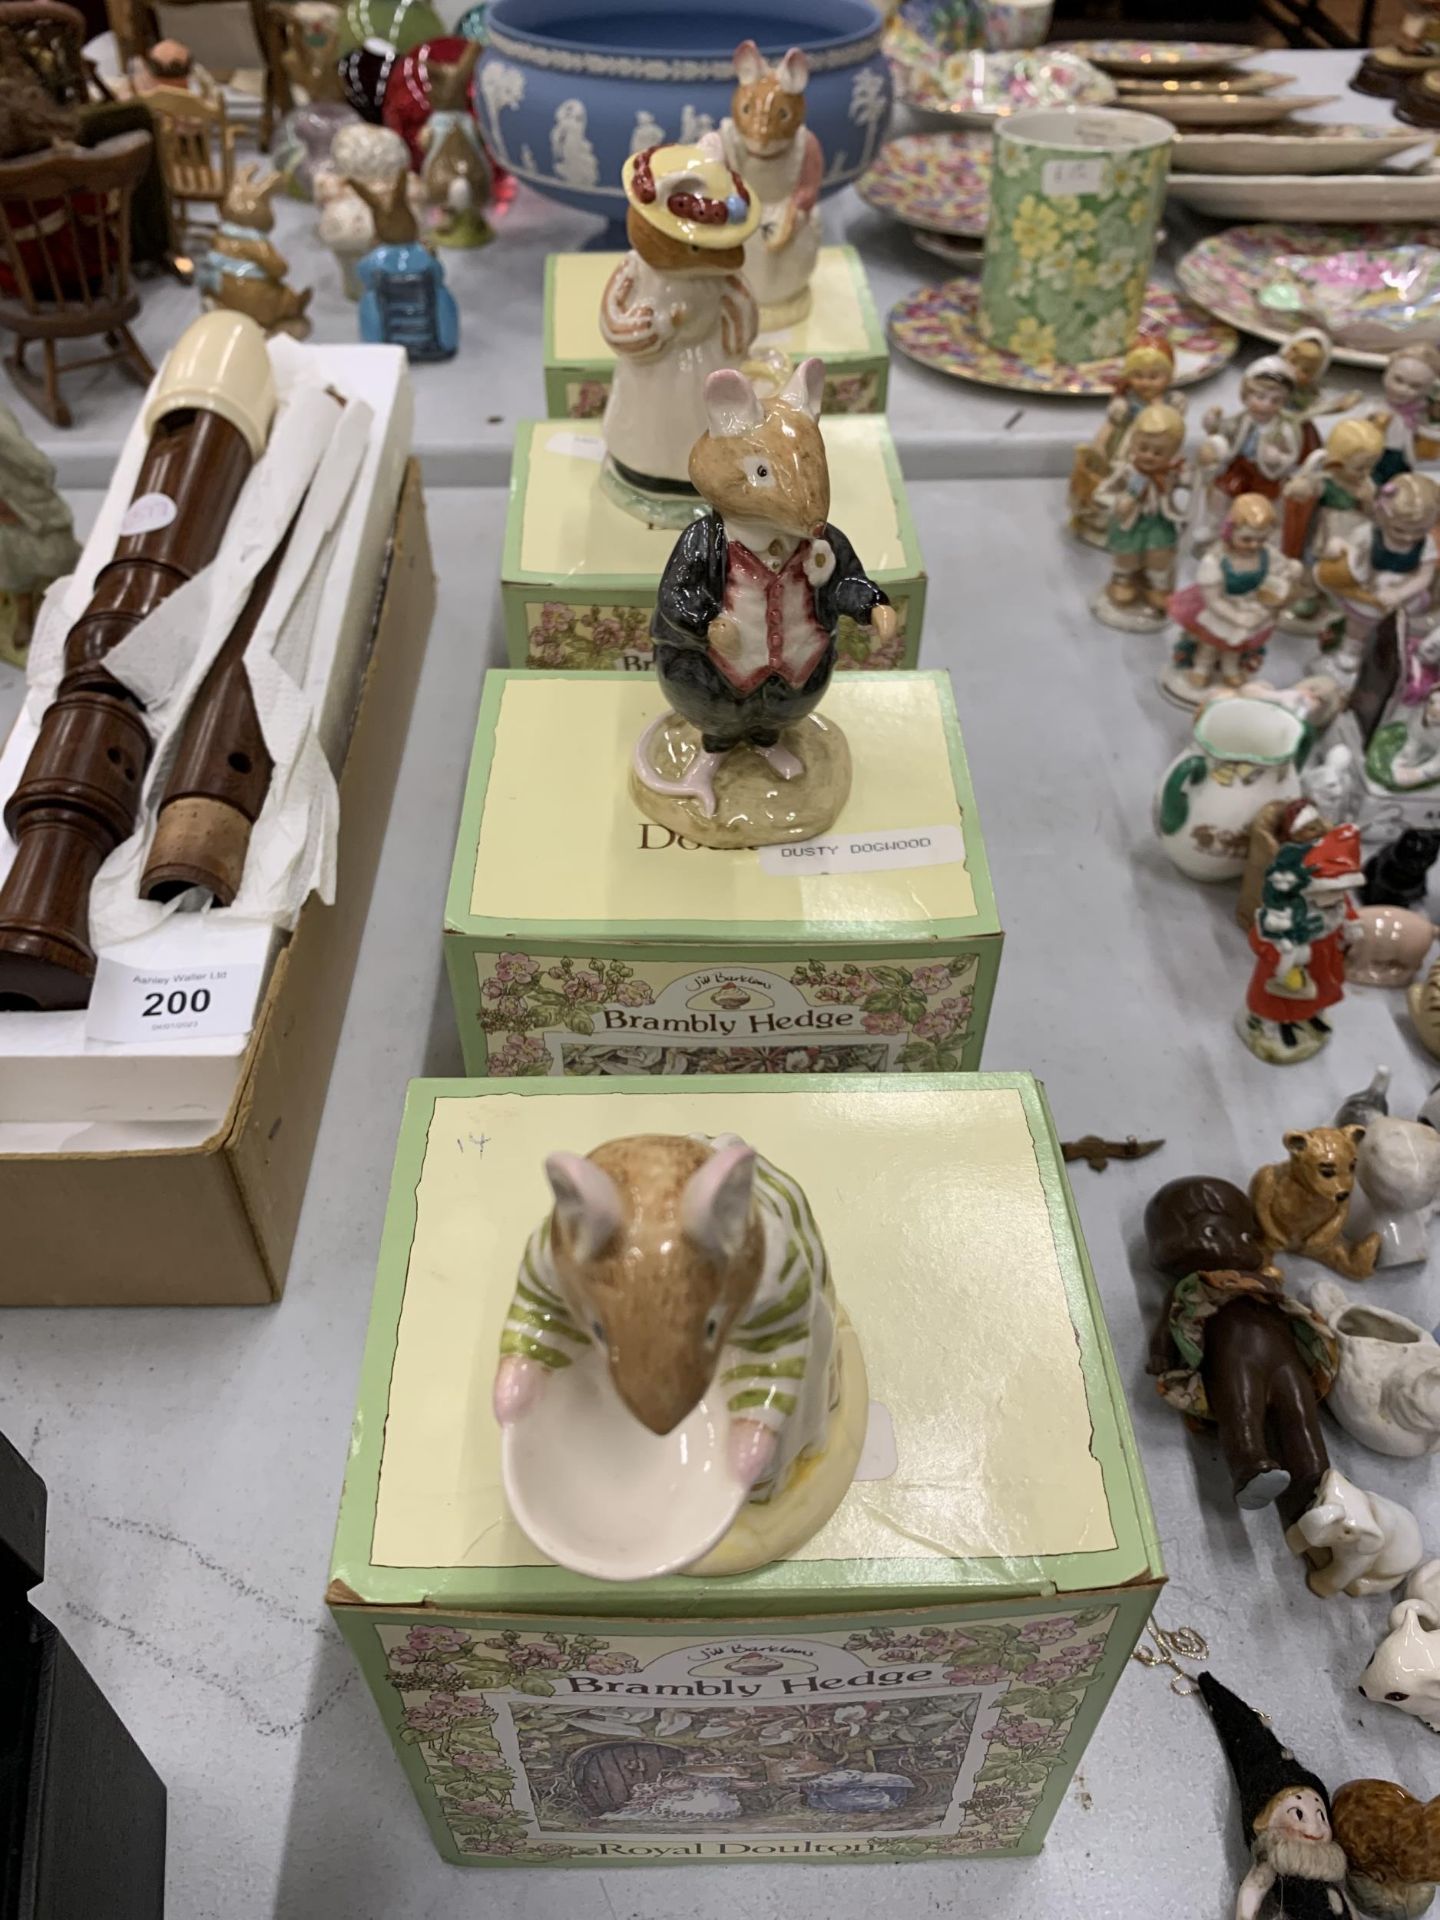 FOUR ROYAL DOULTON BRAMLEY HEDGE FIGURES TO INCLUDE MRS TOADFLAX, DUSTY DOGWOOD, LADY WOODMOUSE